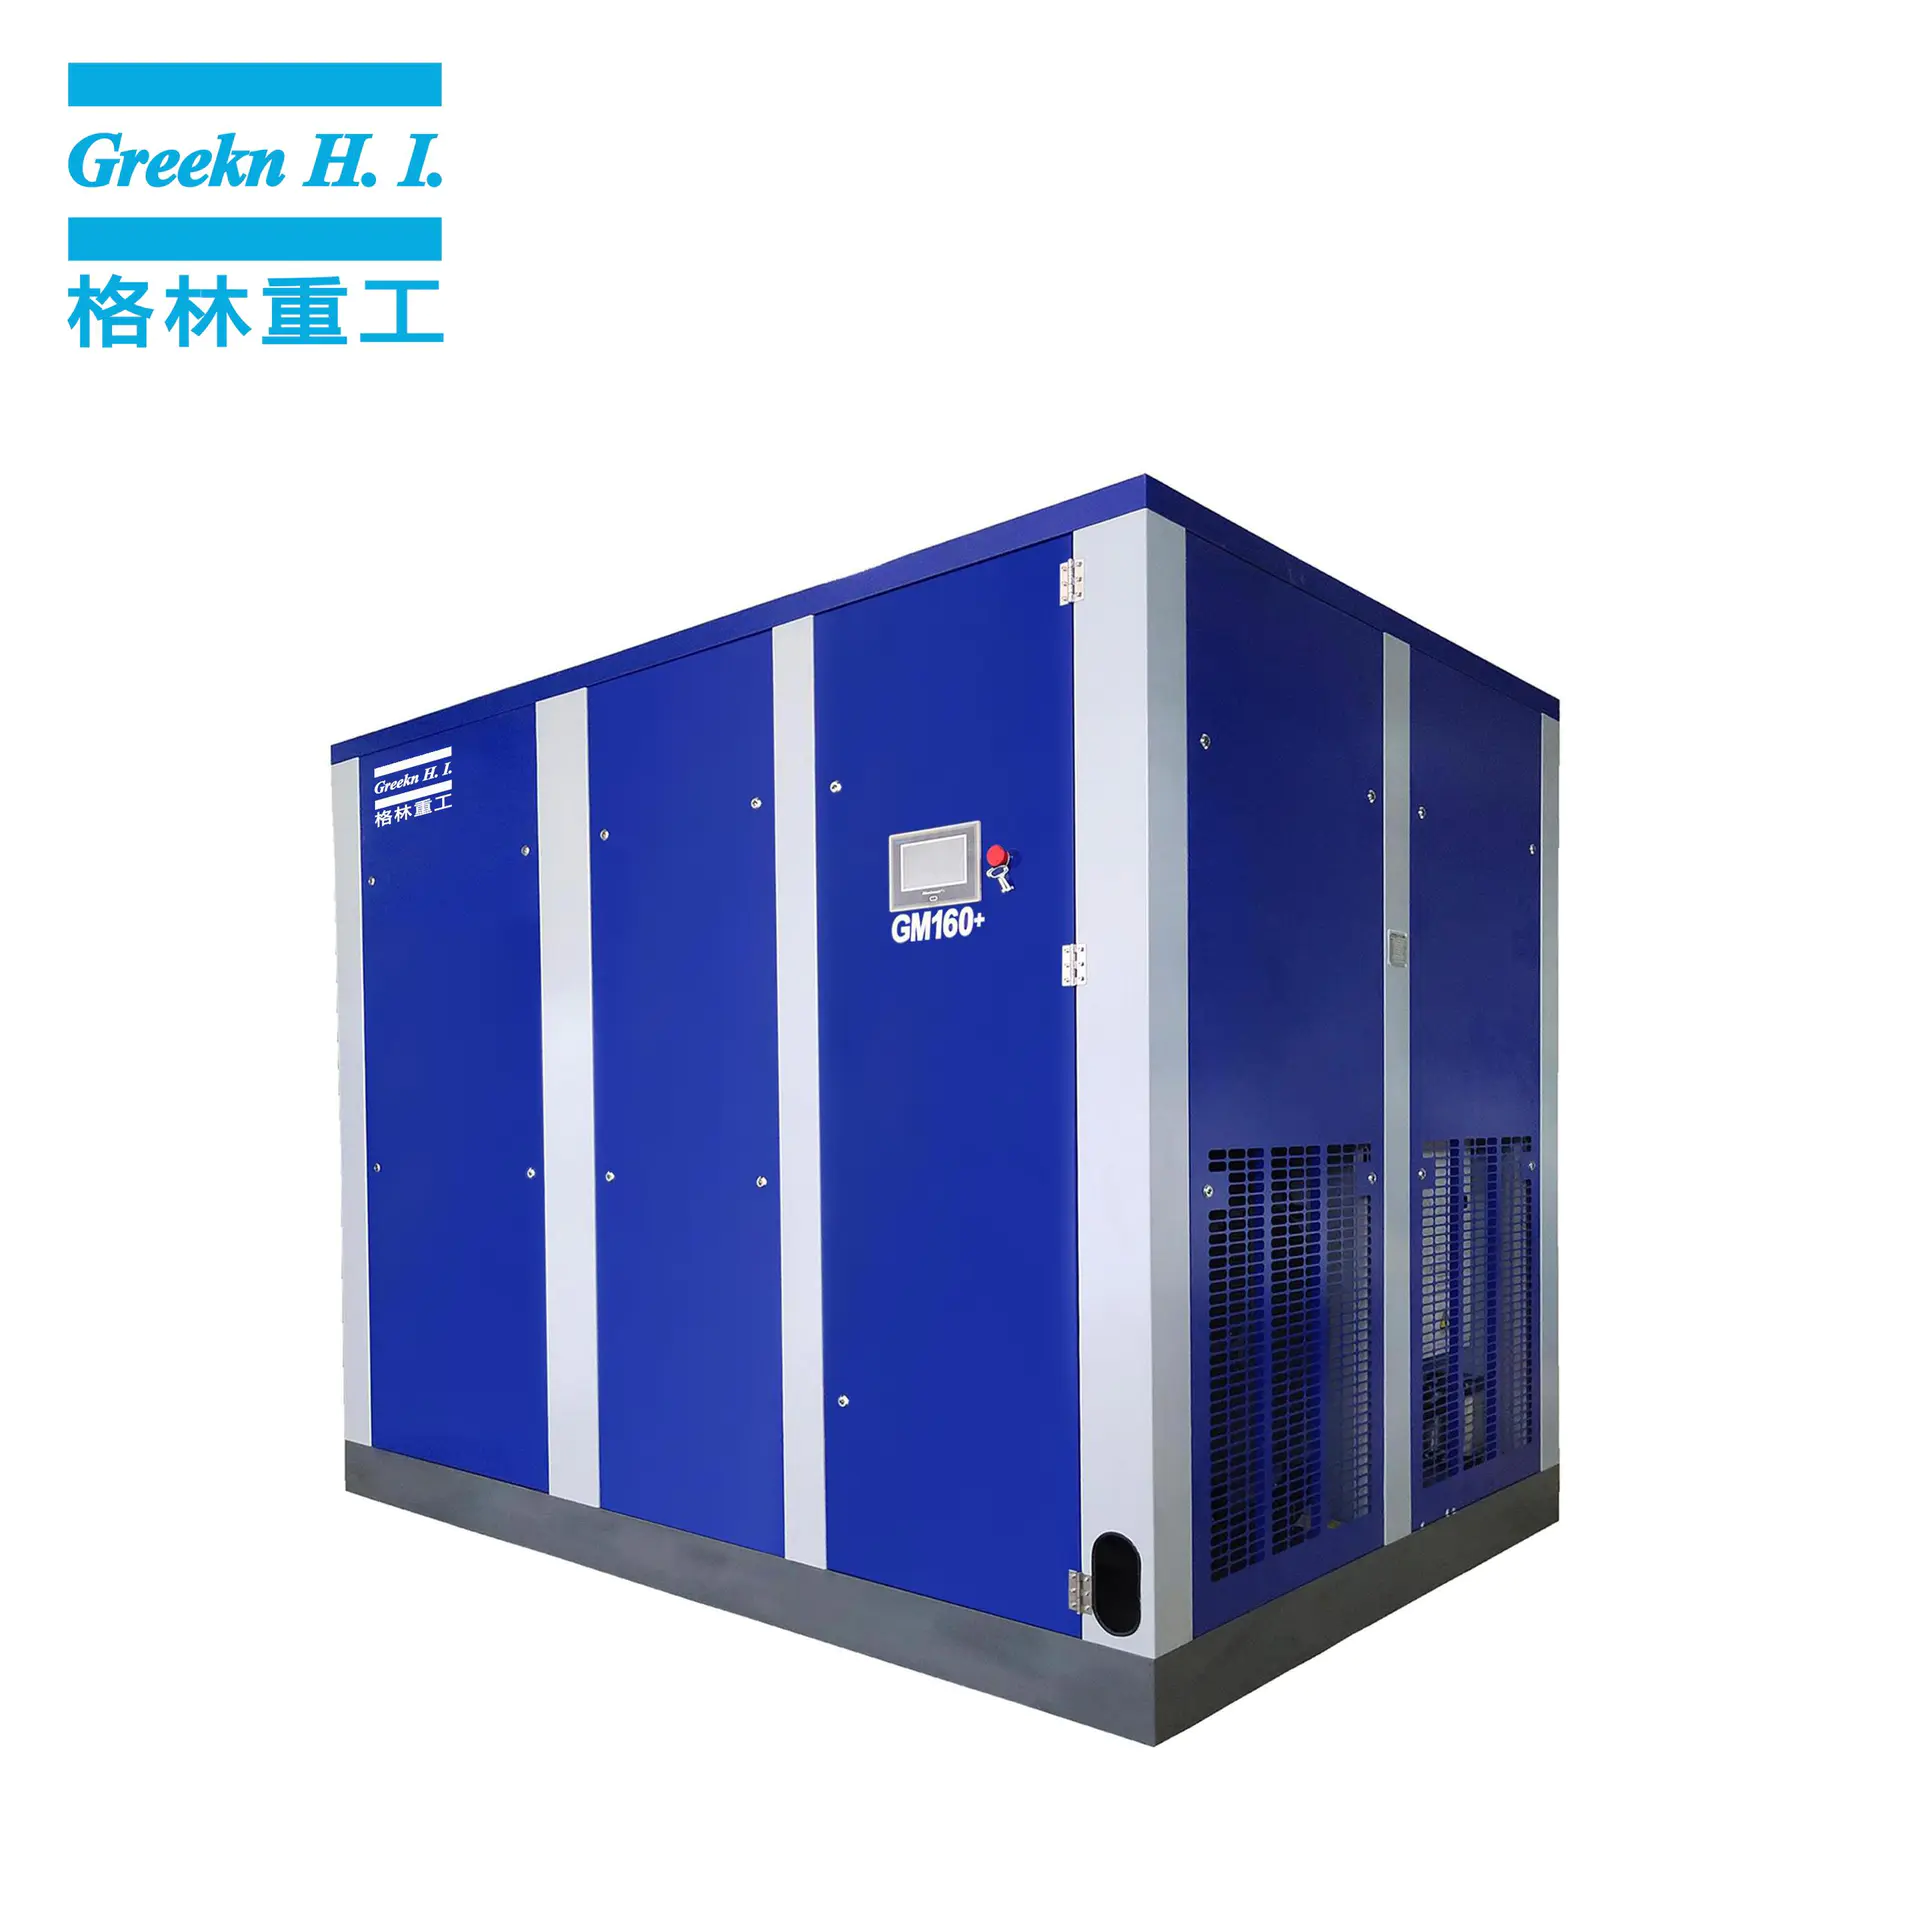 Greenair GM160+ 160KW 215HP Double Stage Variable Speed PM Motor Screw Air Compressor